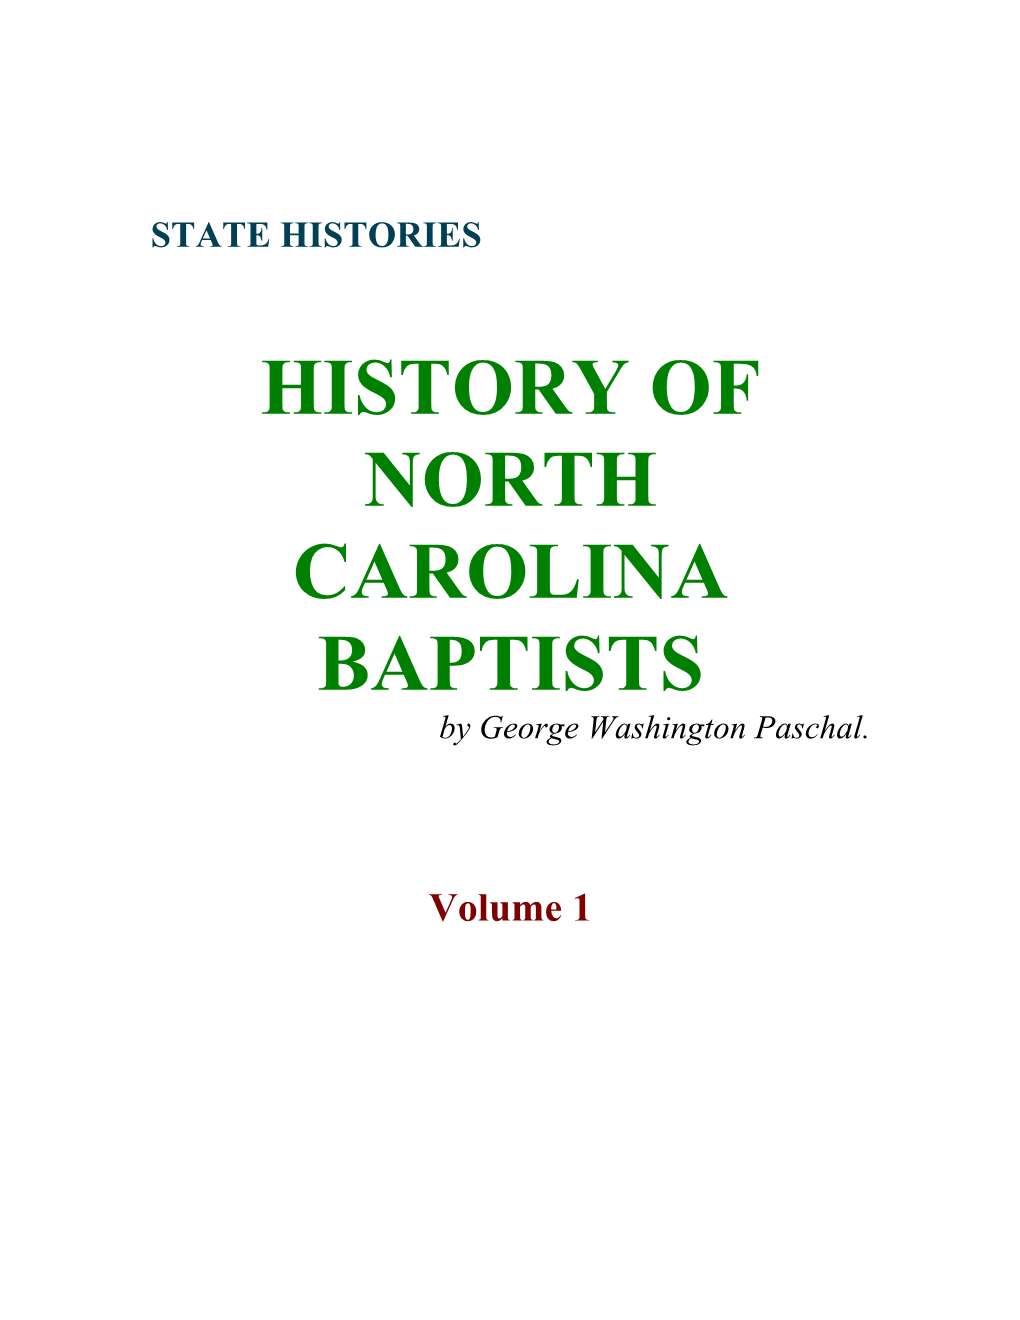 History of the North Carolina Baptists in the Library of Judge T